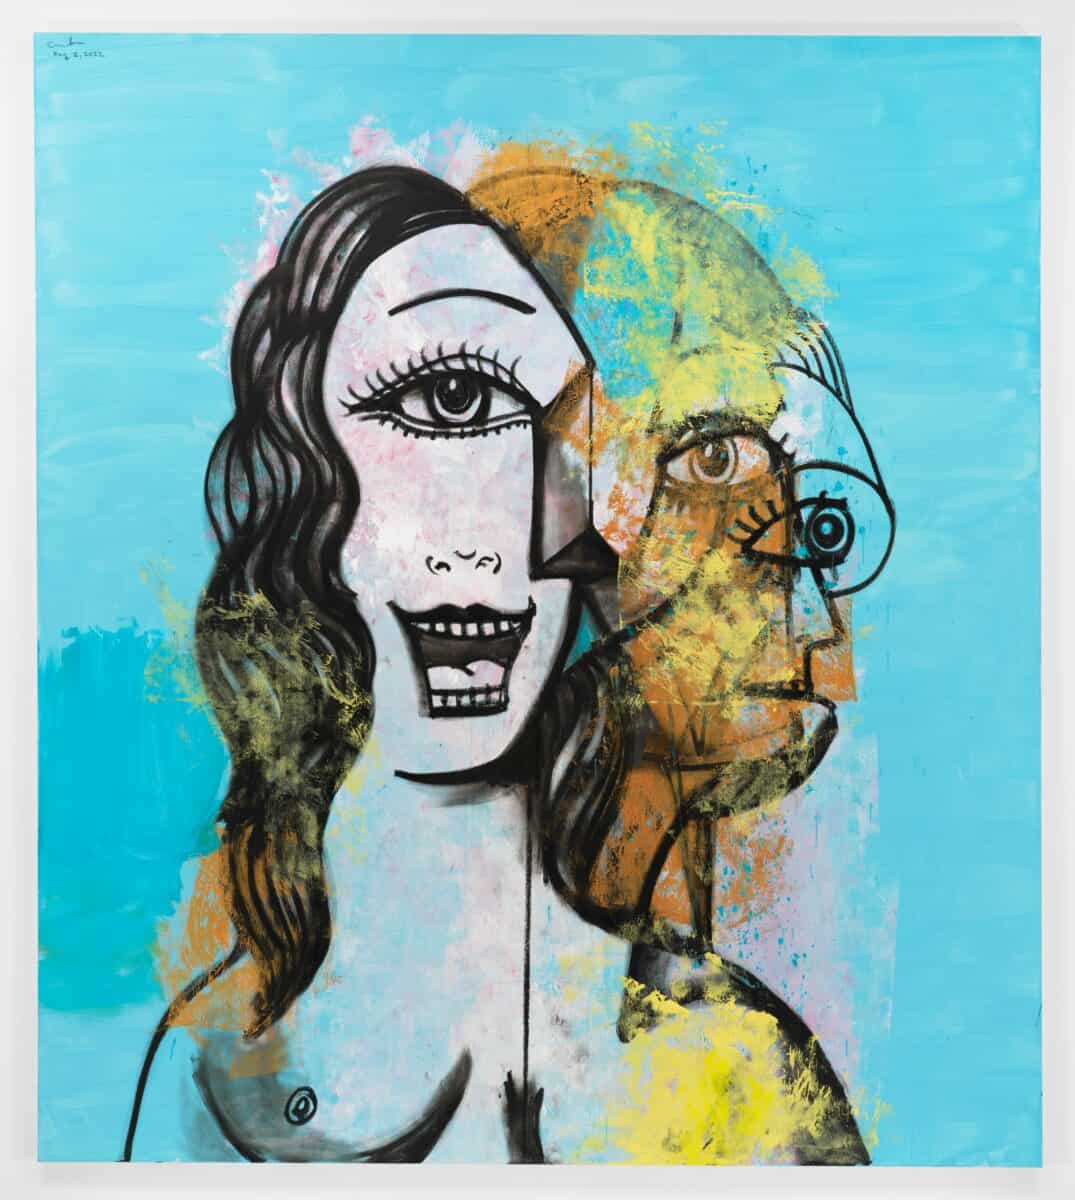 George Condo to inaugurate Hauser & Wirth's newly established West Hollywood gallery